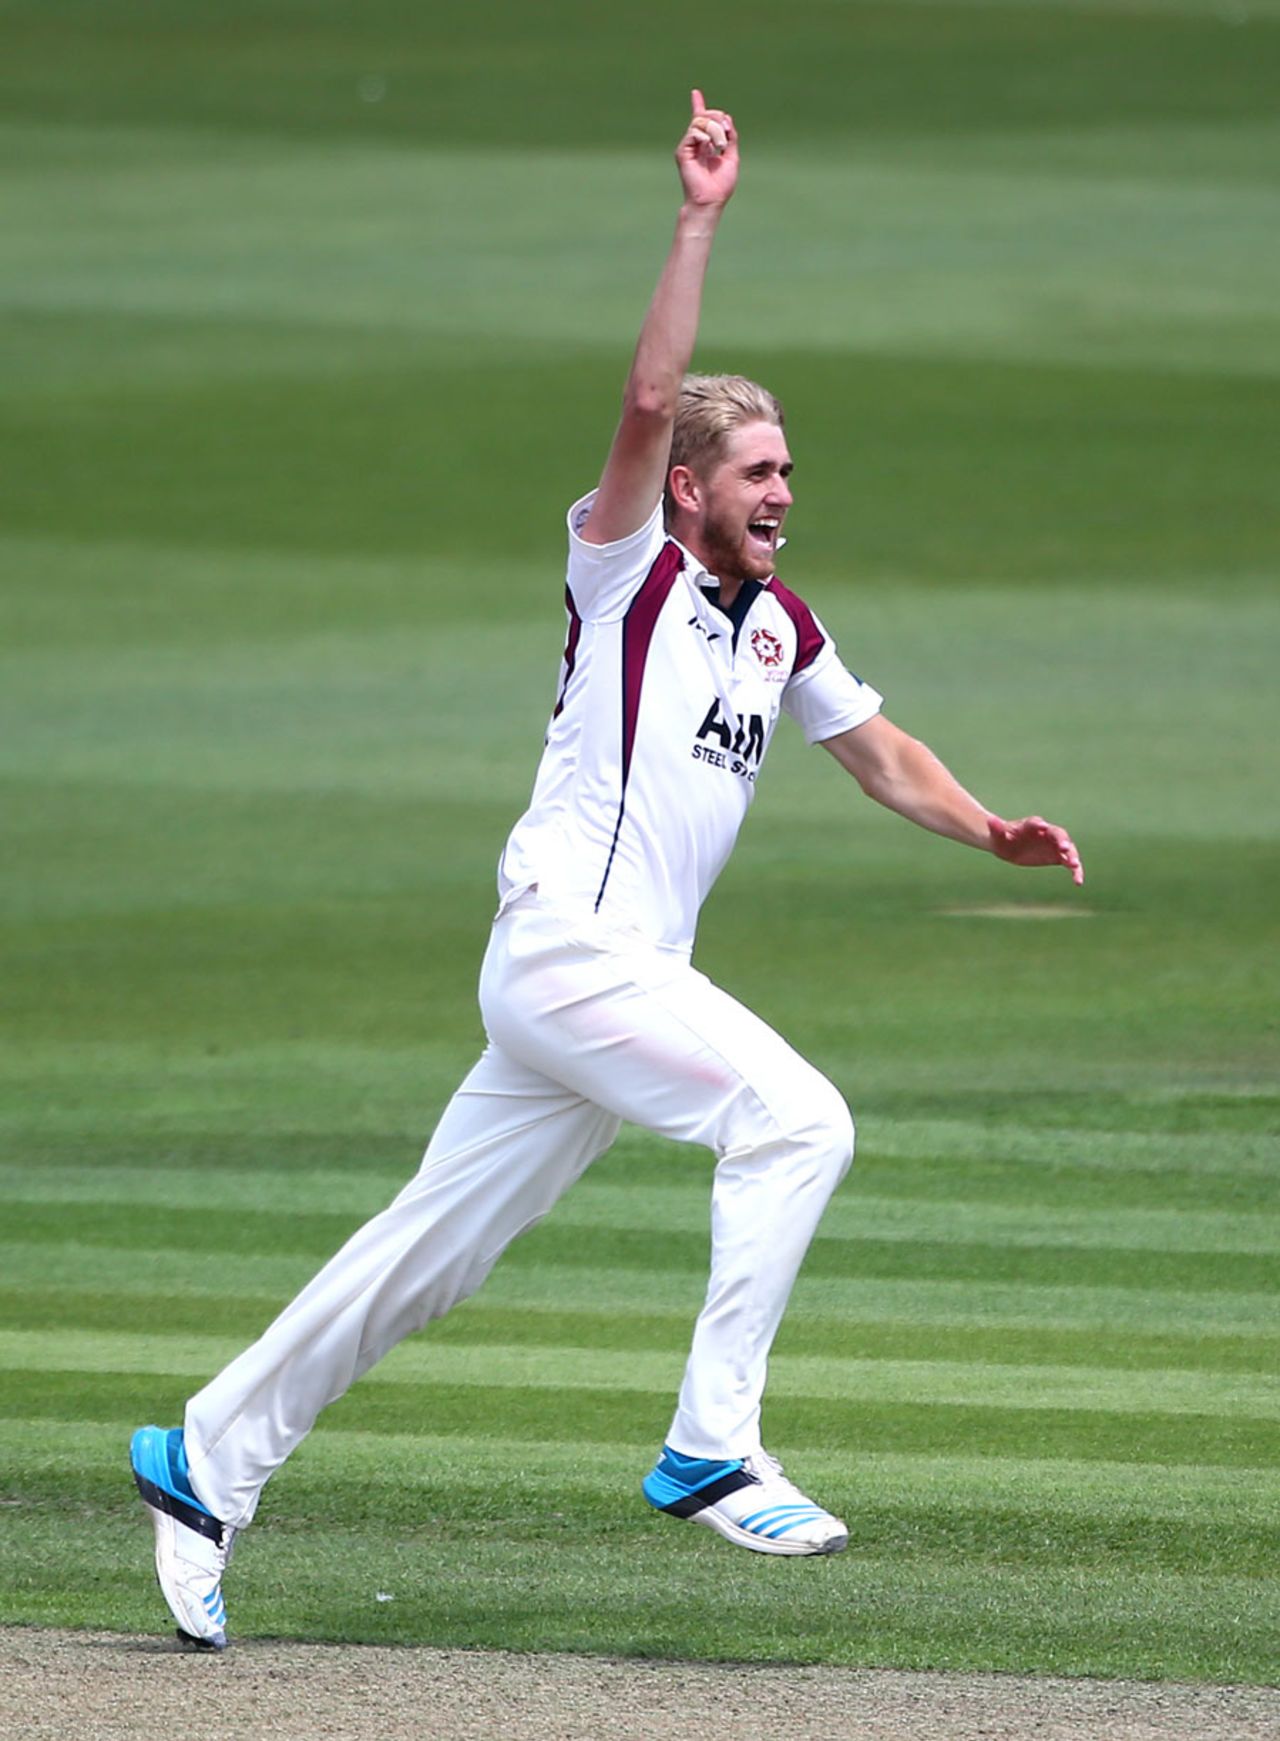 Olly Stone celebrates a wicket, Sussex v Northamptonshire, County Championship, Division One, Hove, 1st day, July 6, 2014